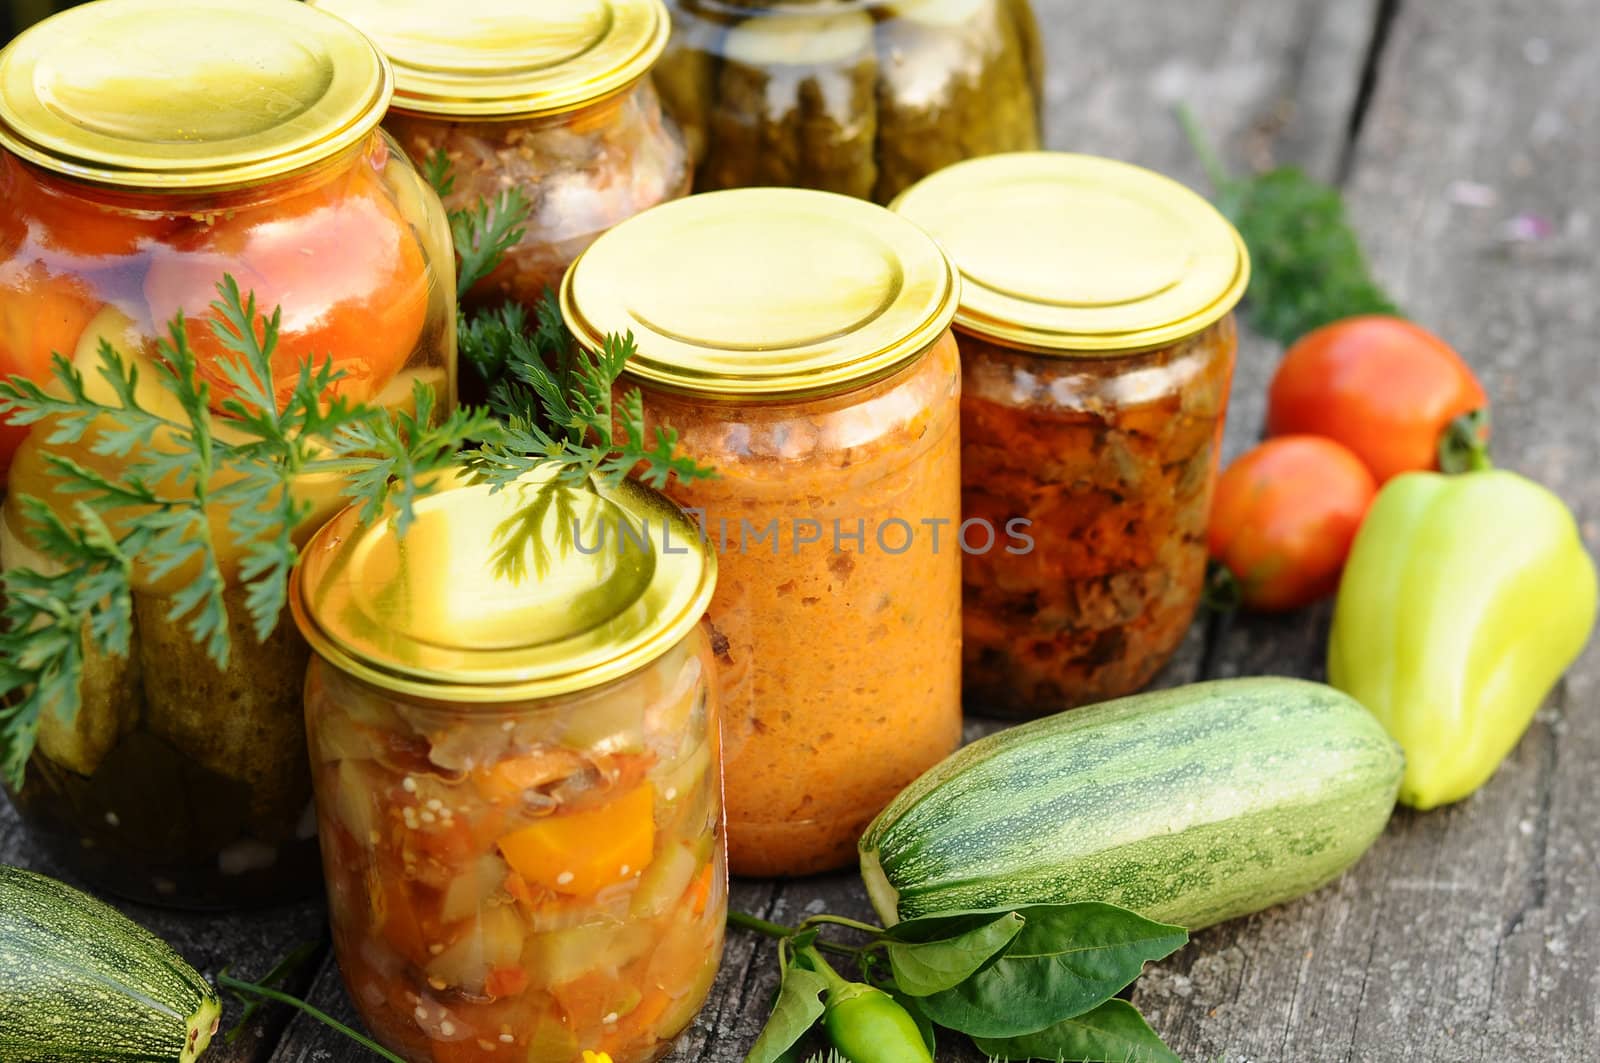 Home canning, canned vegetables by olgavolodina